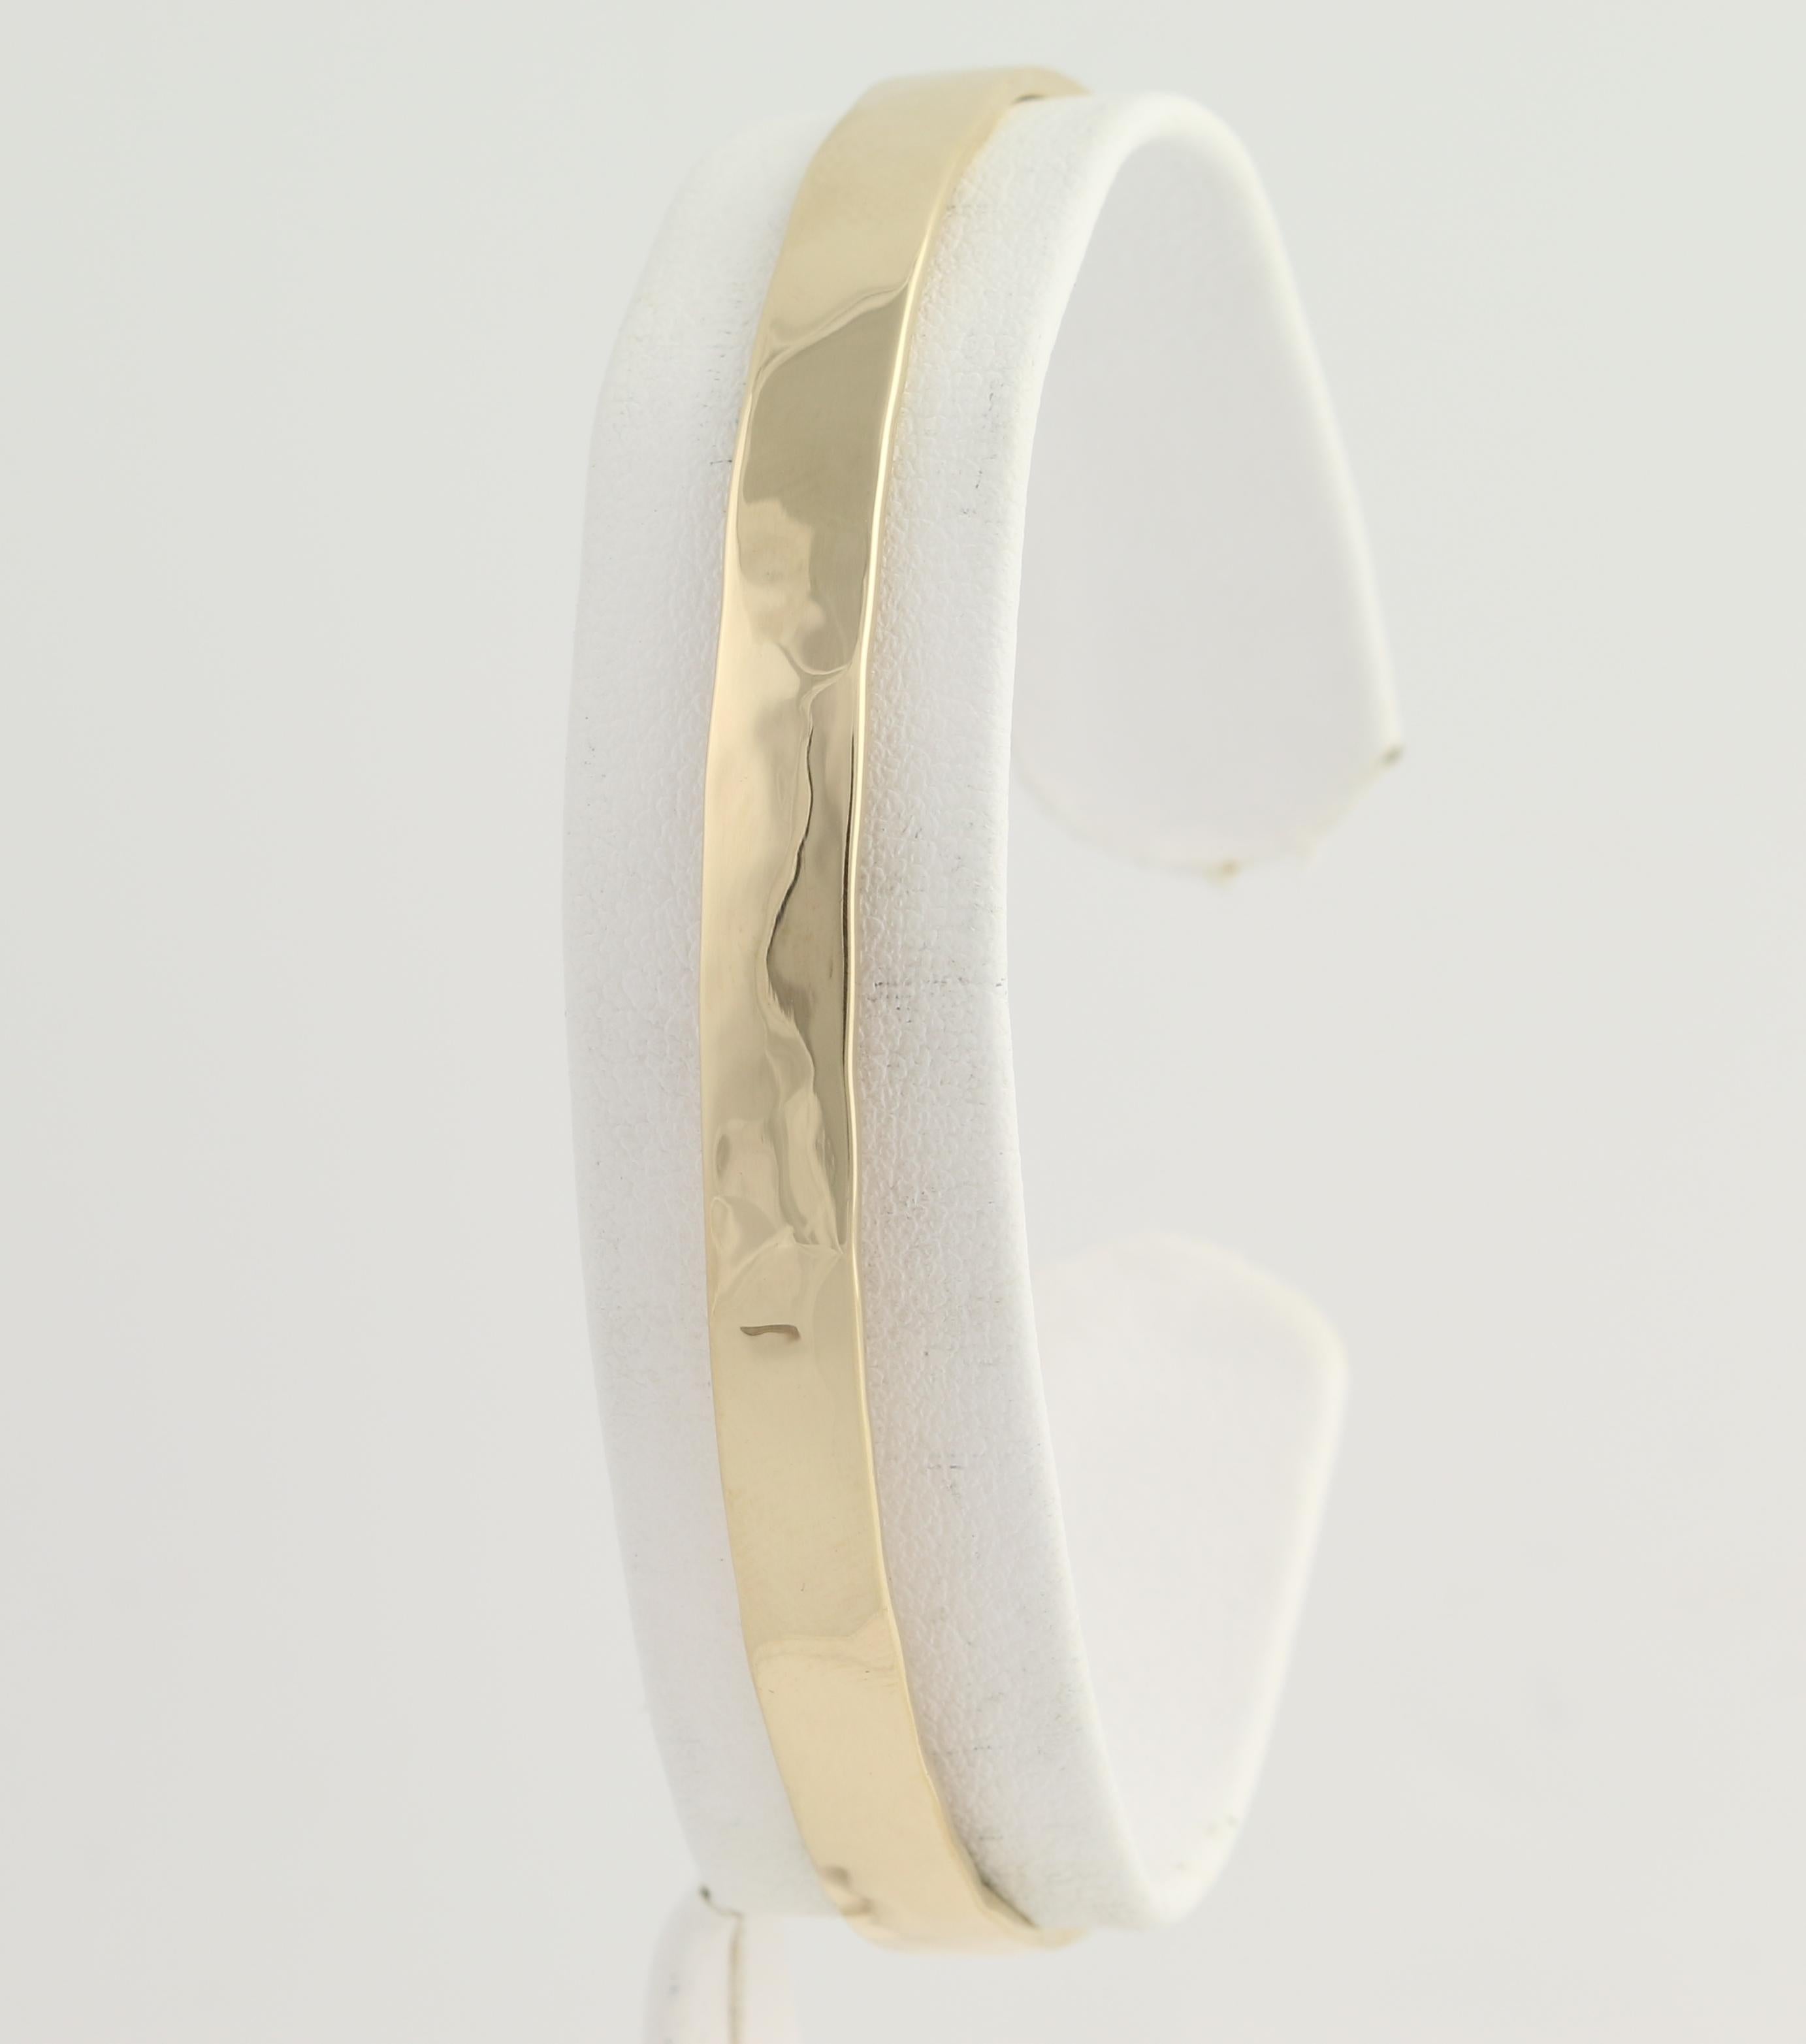 Treat yourself or a special friend to a chic, go-with-anything cuff bracelet! This brand-new piece is handmade from 14k yellow gold and the hammered face smoothly polished so that the cuff draws and reflects light with any movement. Solid in